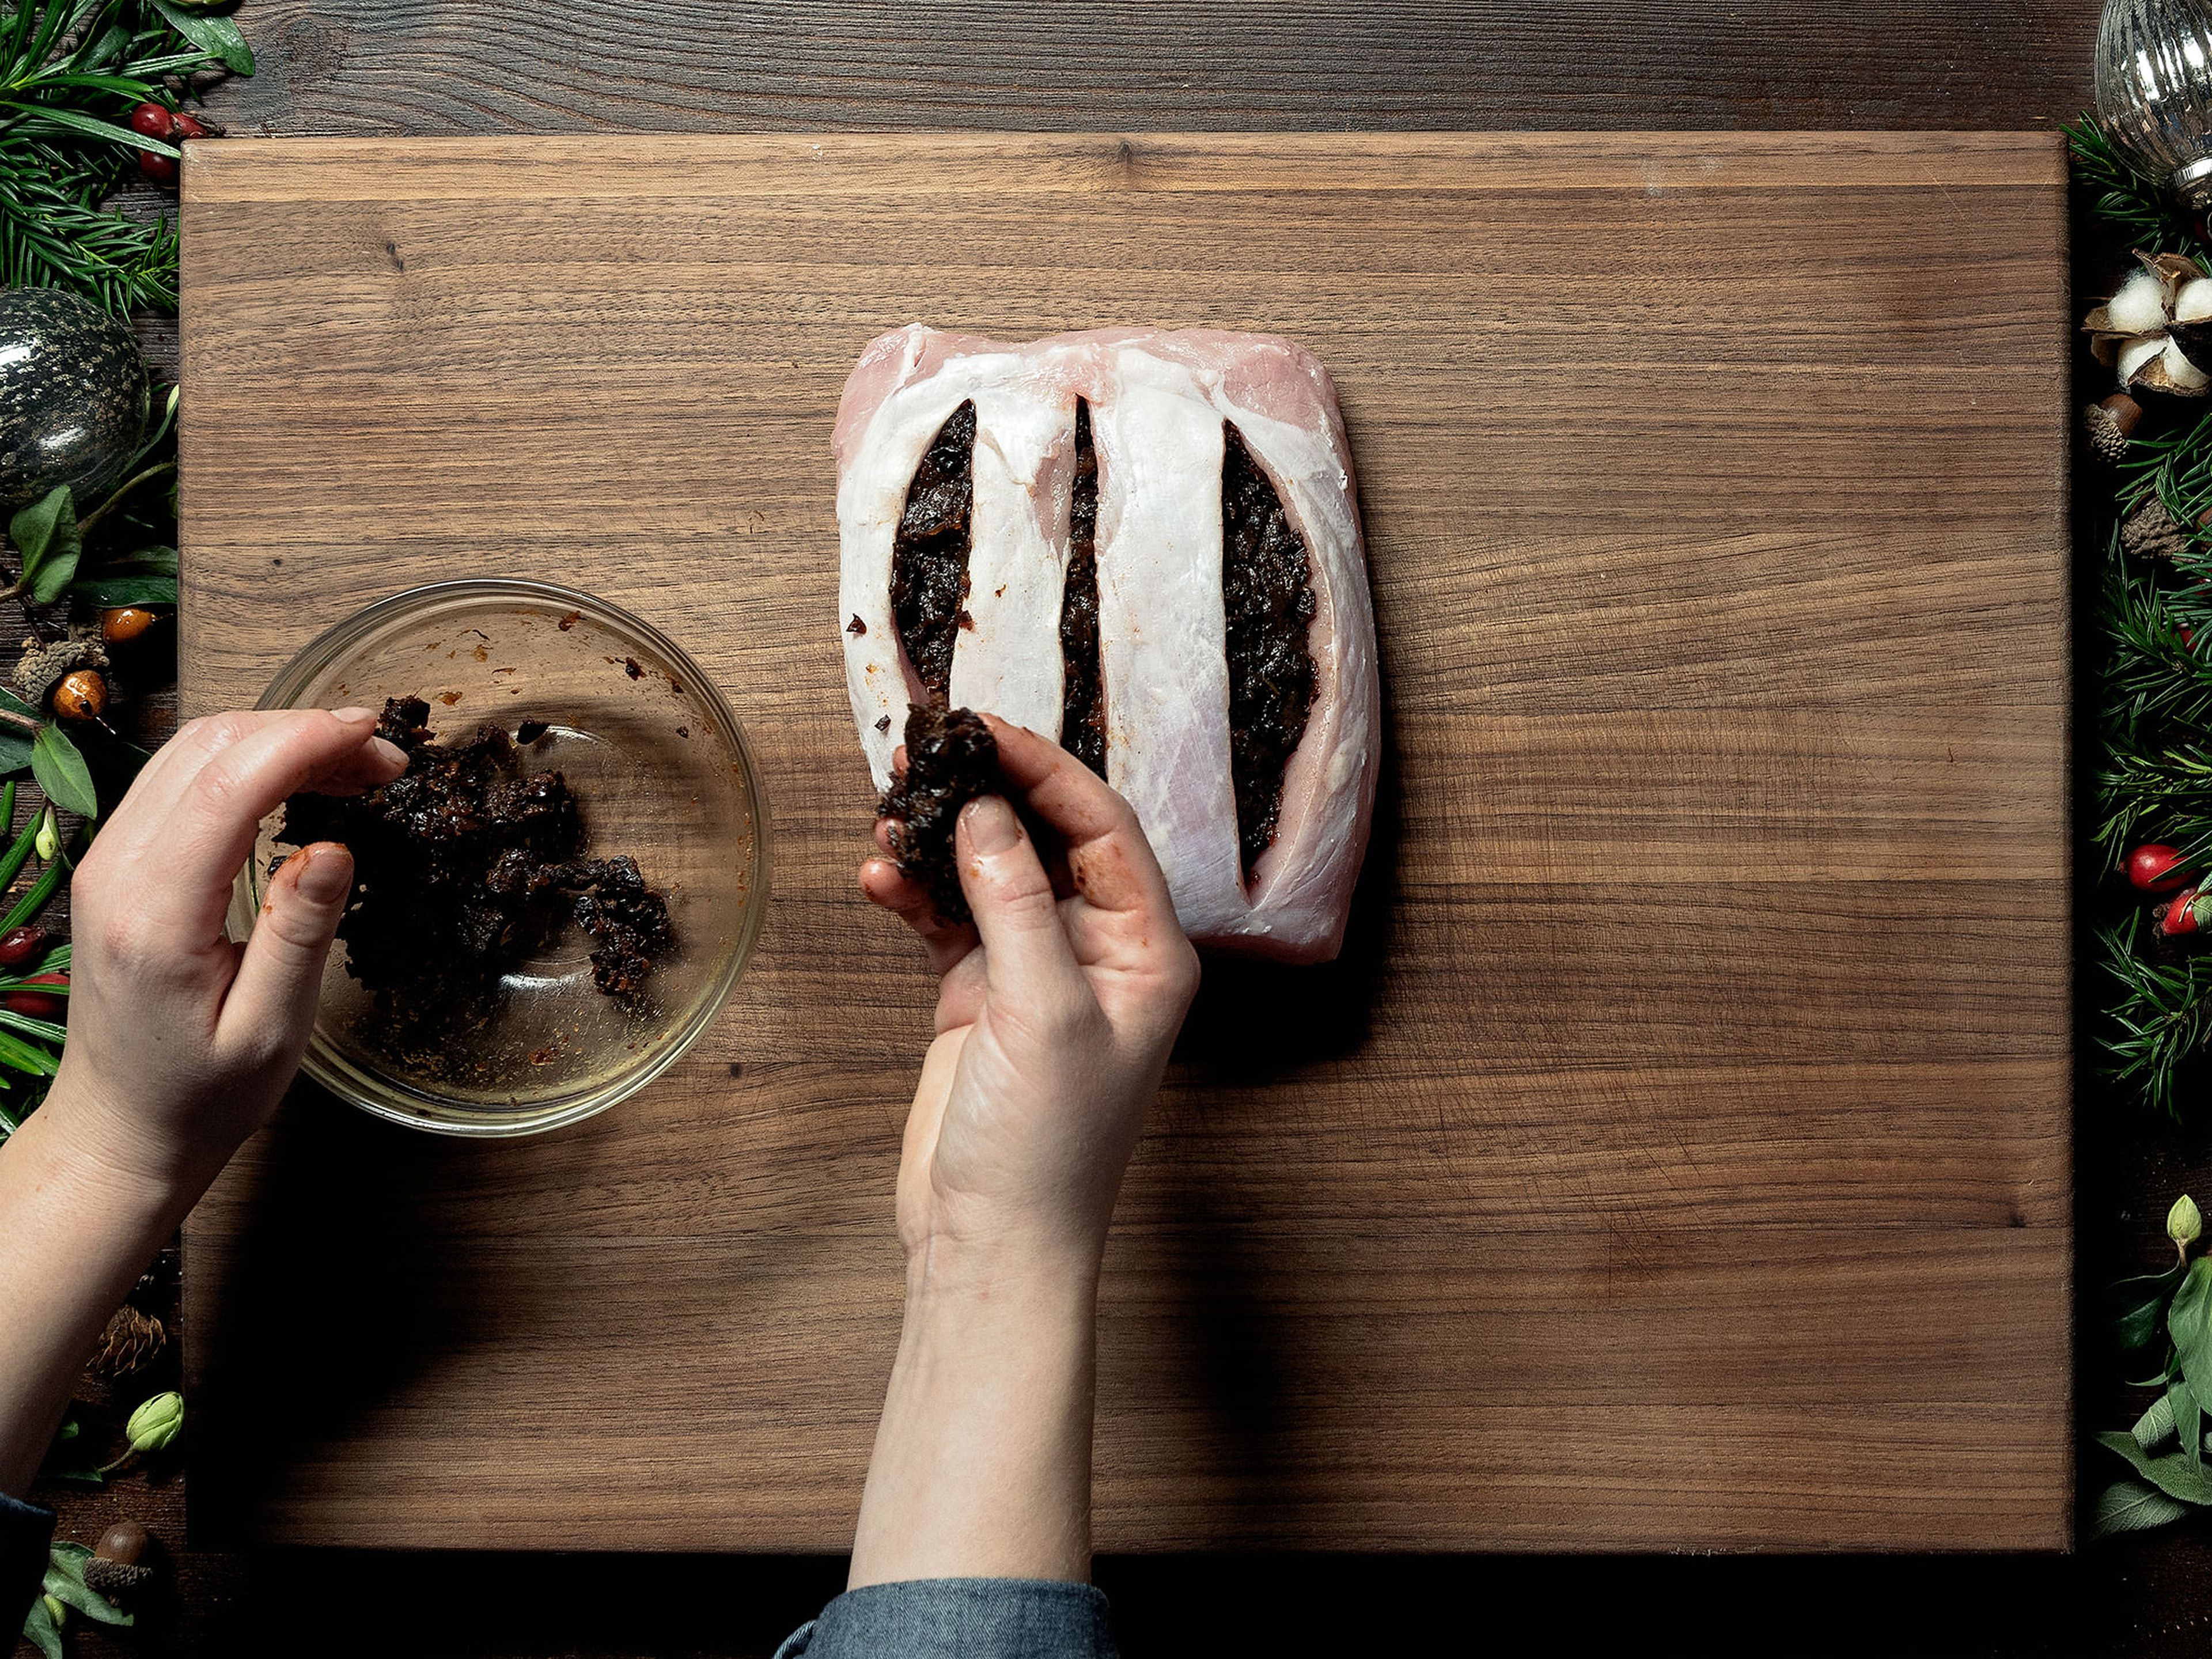 Preheat the oven to 160°C/325°C. Mince the prunes and mix with ground ginger, ground cloves, and ground cinnamon in a food processor. Cut three pockets lengthwise into the pork roast, making sure not to cut all the way through, and fill each pocket with the prune filling.